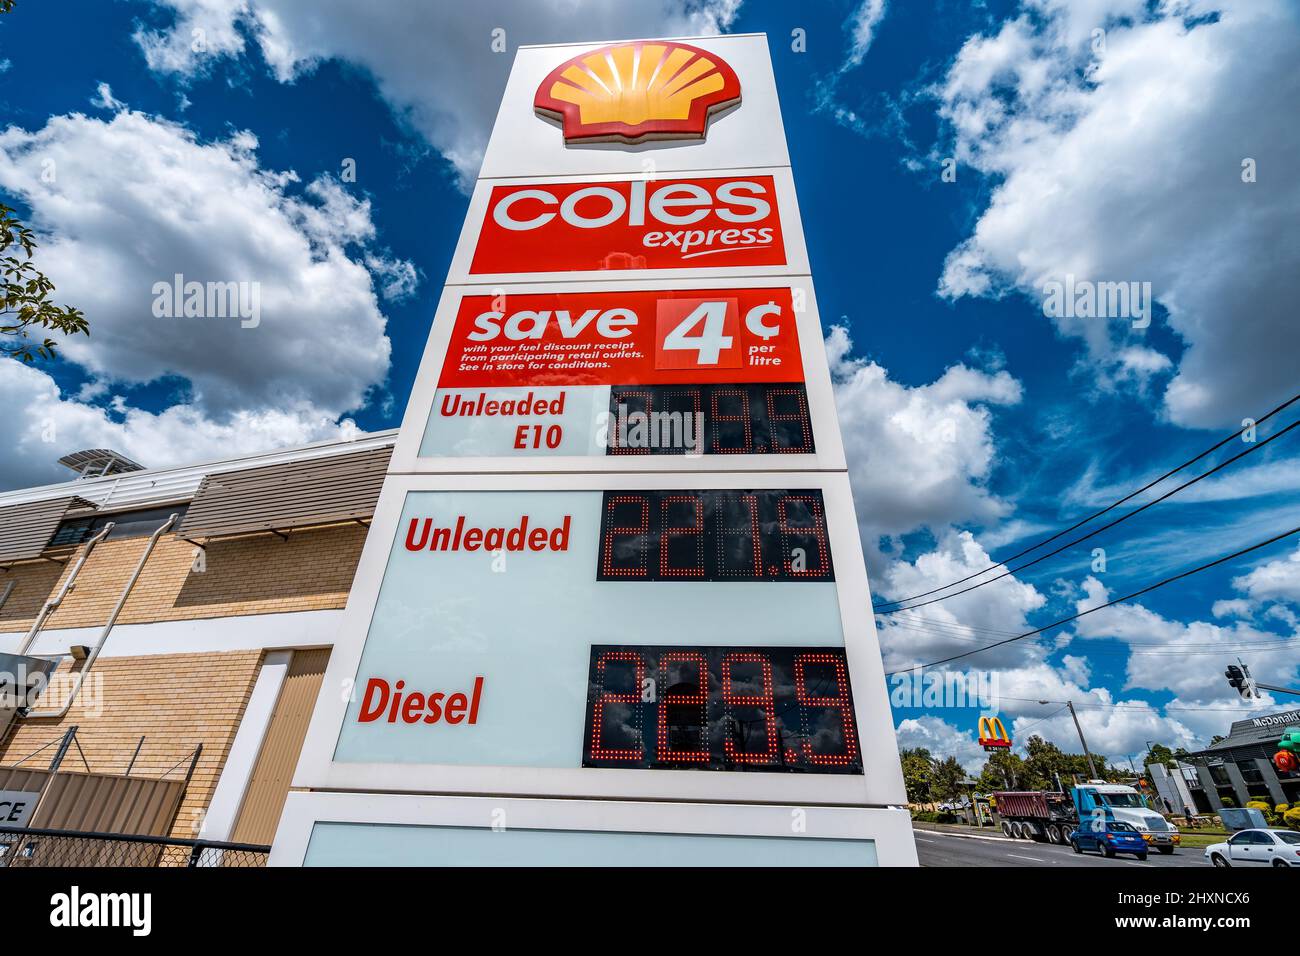 Brisbane, Queensland, Australia - Mar 14, 2022: Fuel prices at the local Shell Coles Express petrol station Stock Photo